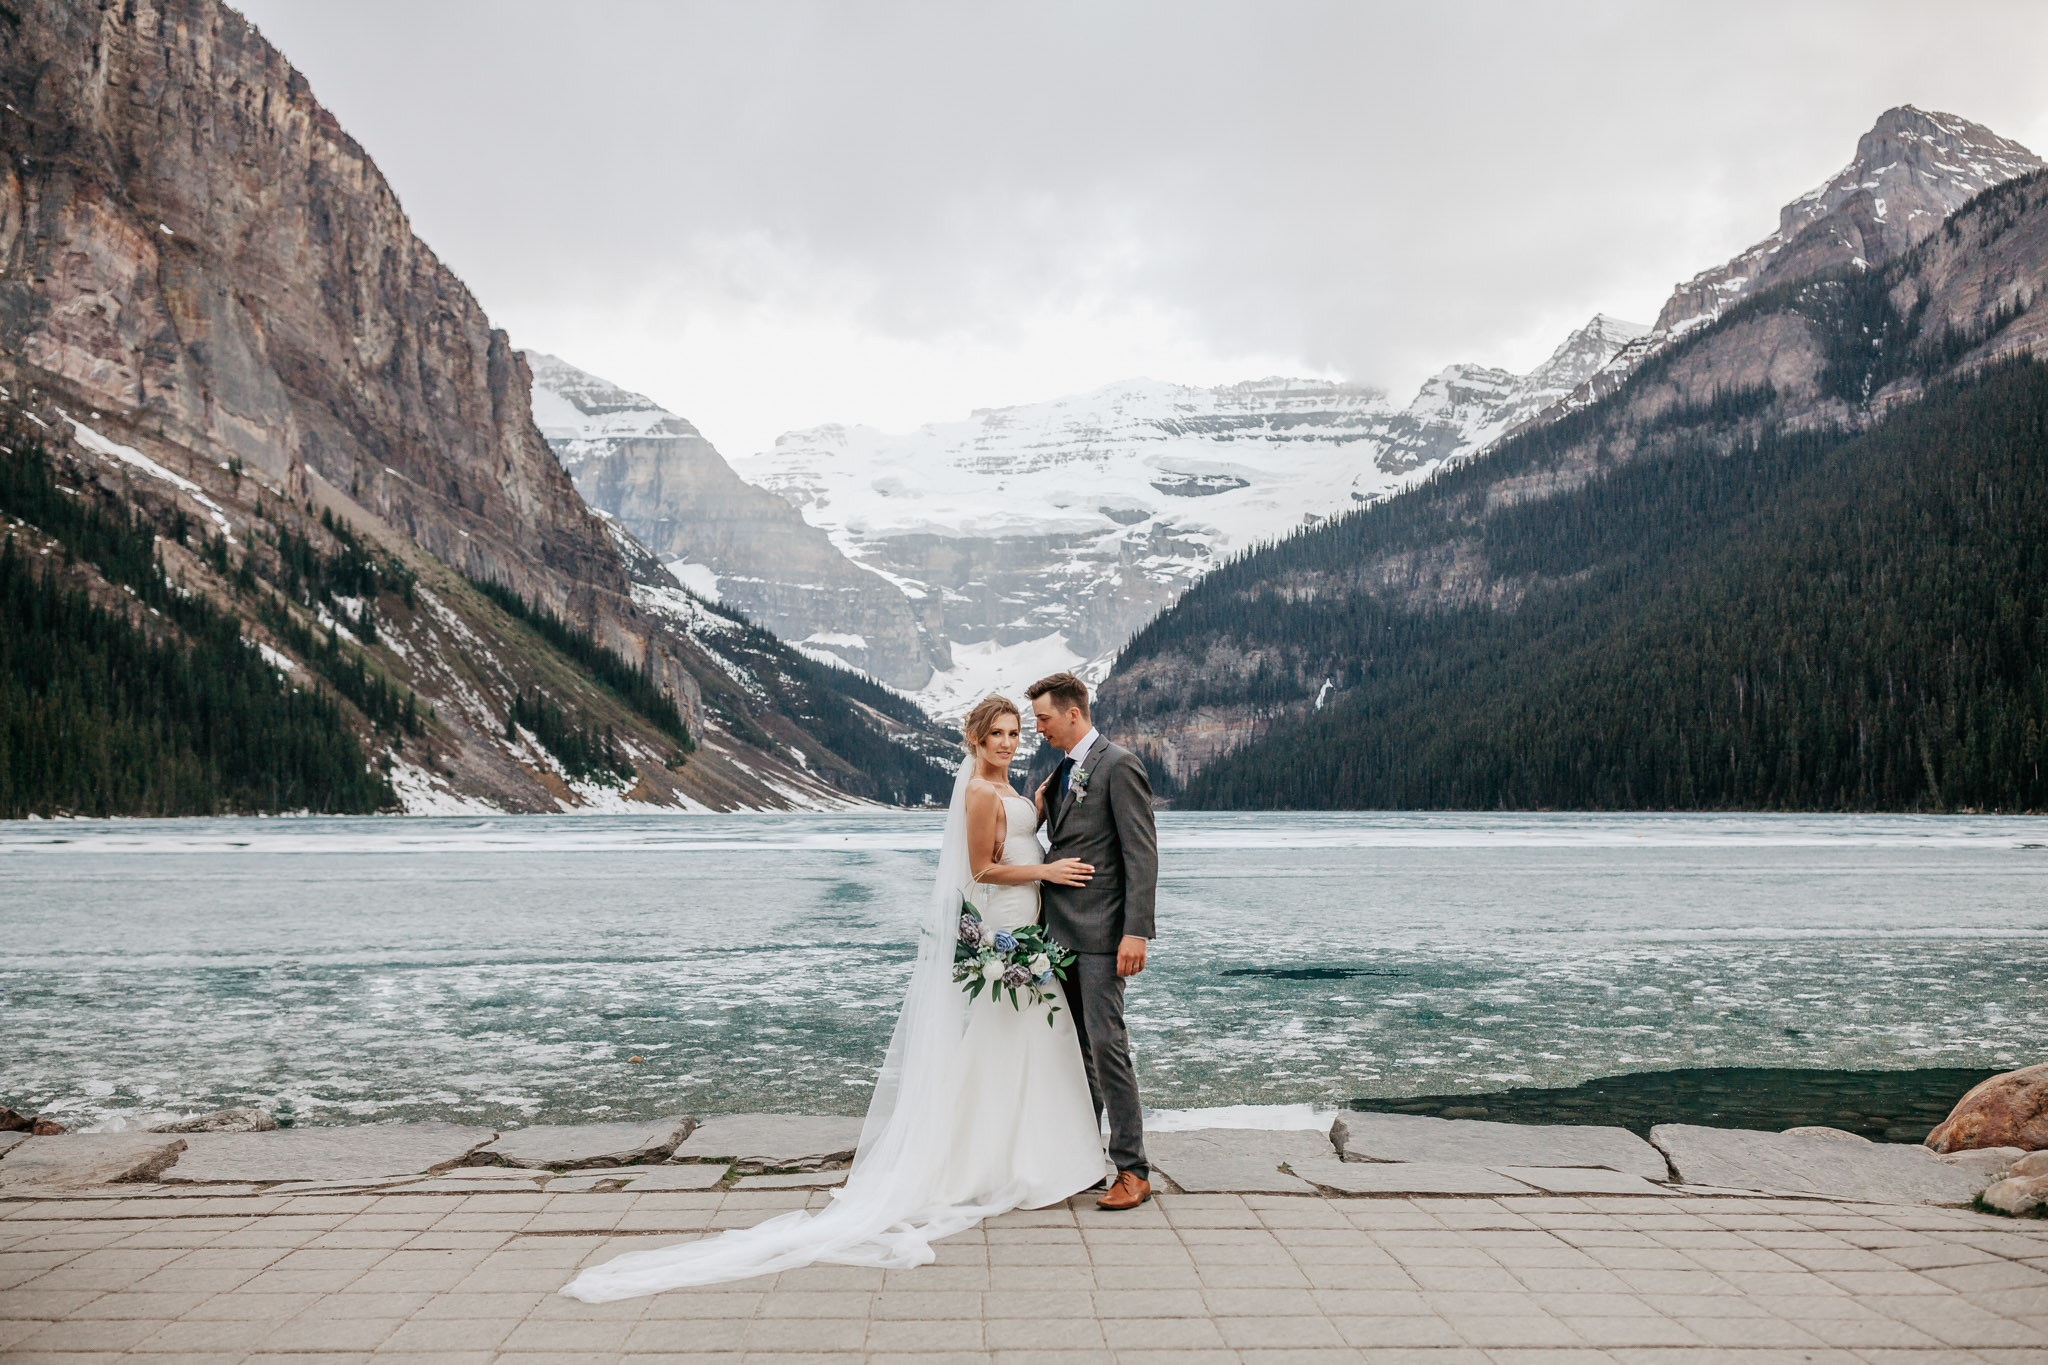 How To Keep Warm & Cozy During Your Winter Wedding in Canadian Rockies